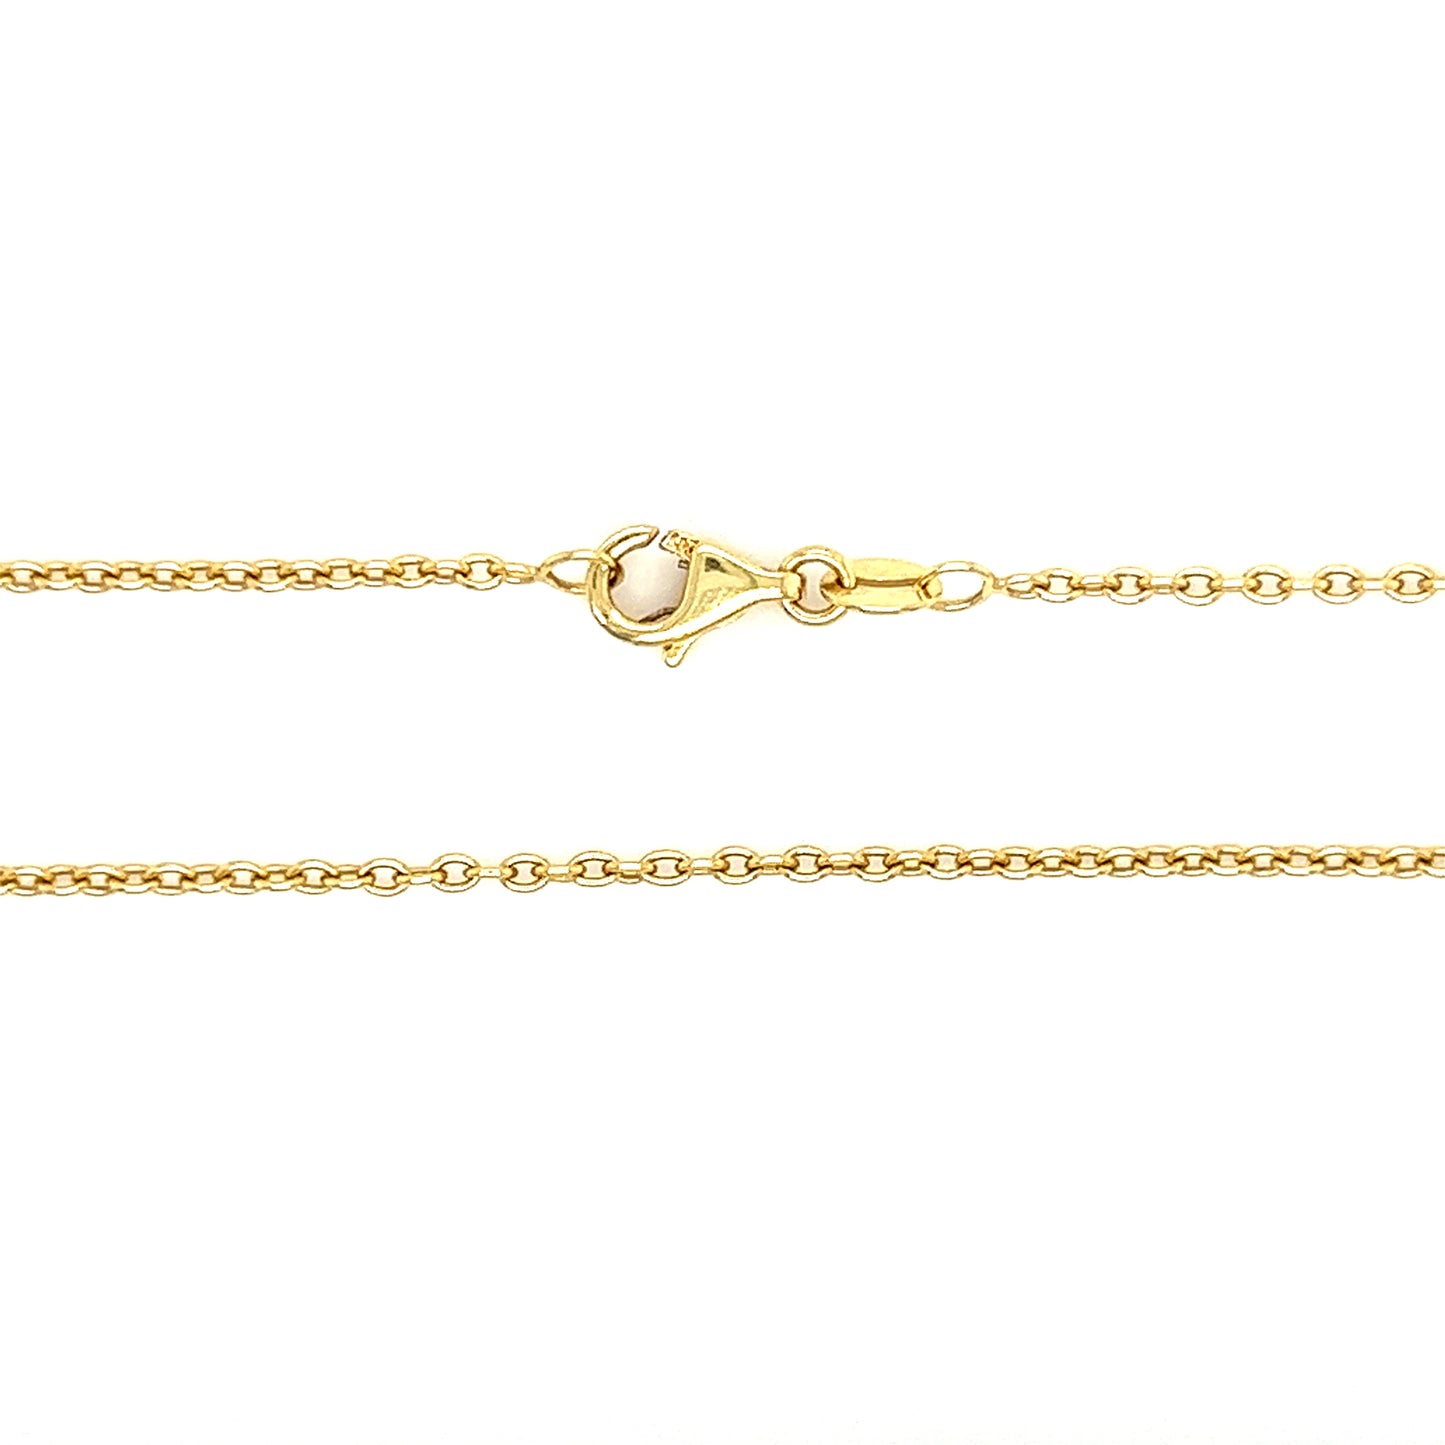 Cable 1.5mm Chain with 18in Length in 14K Yellow Gold Chain and Lobster View